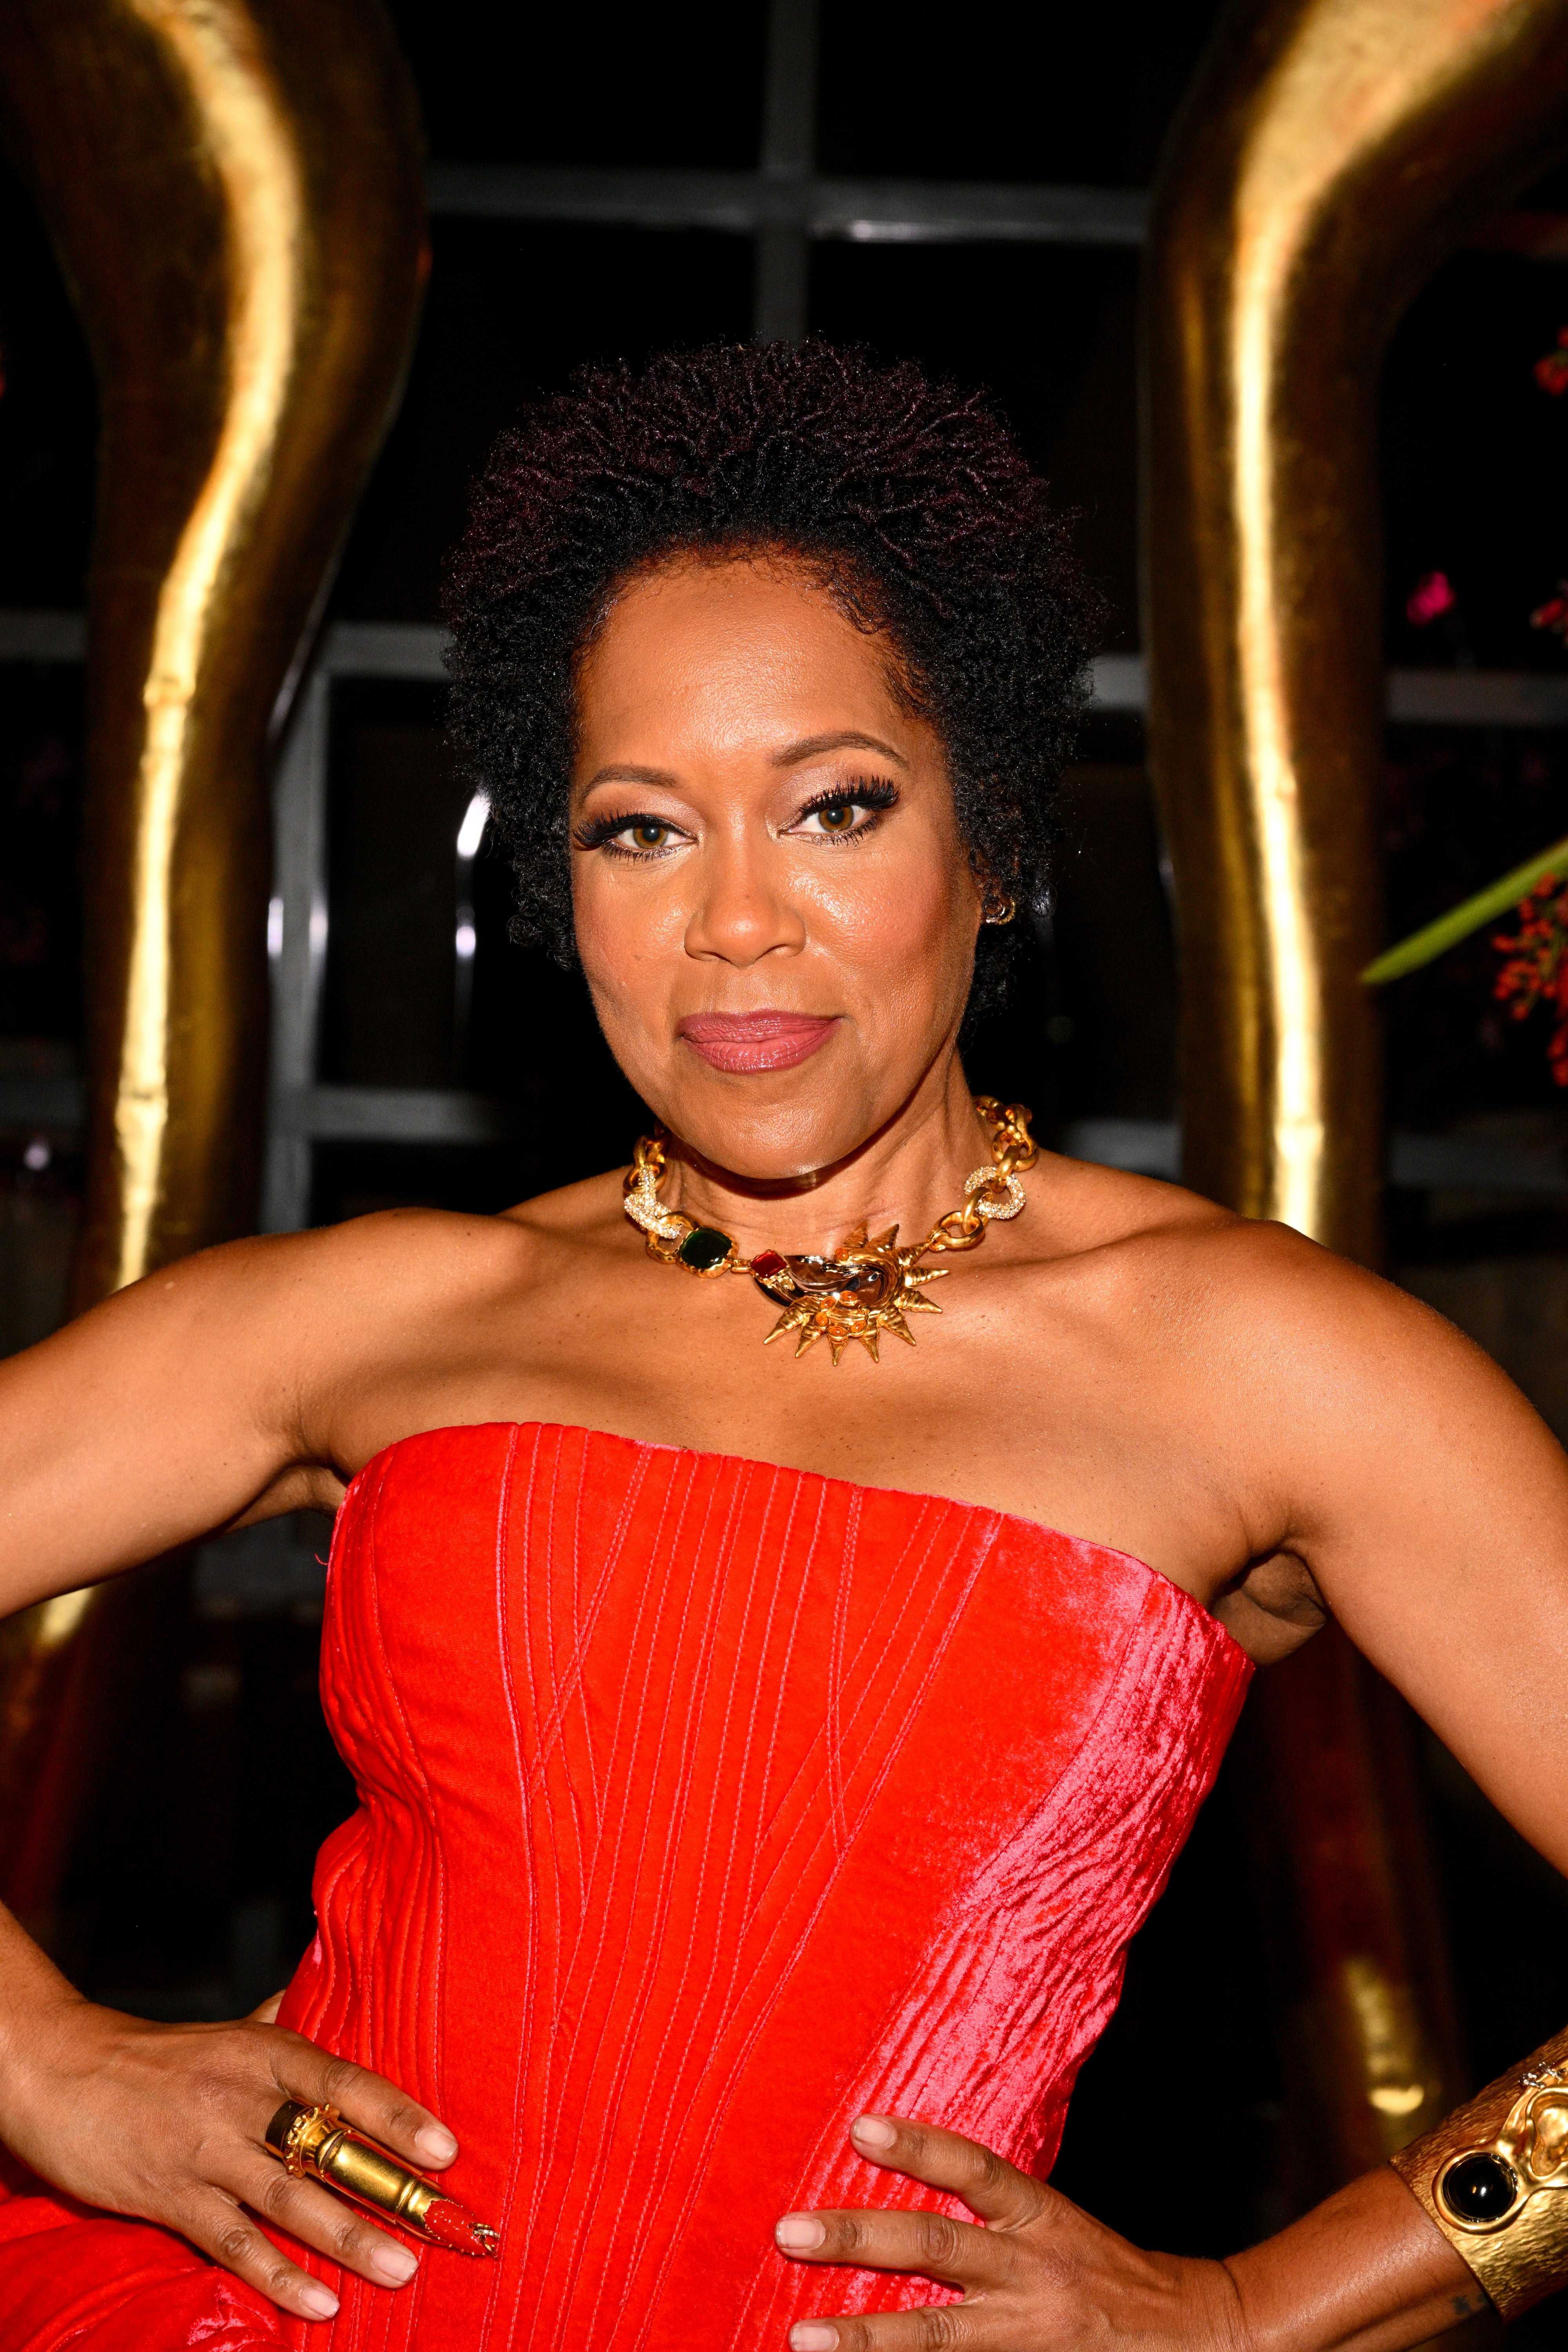 Closeup of Regina King posing for the camera with her hand on her hips